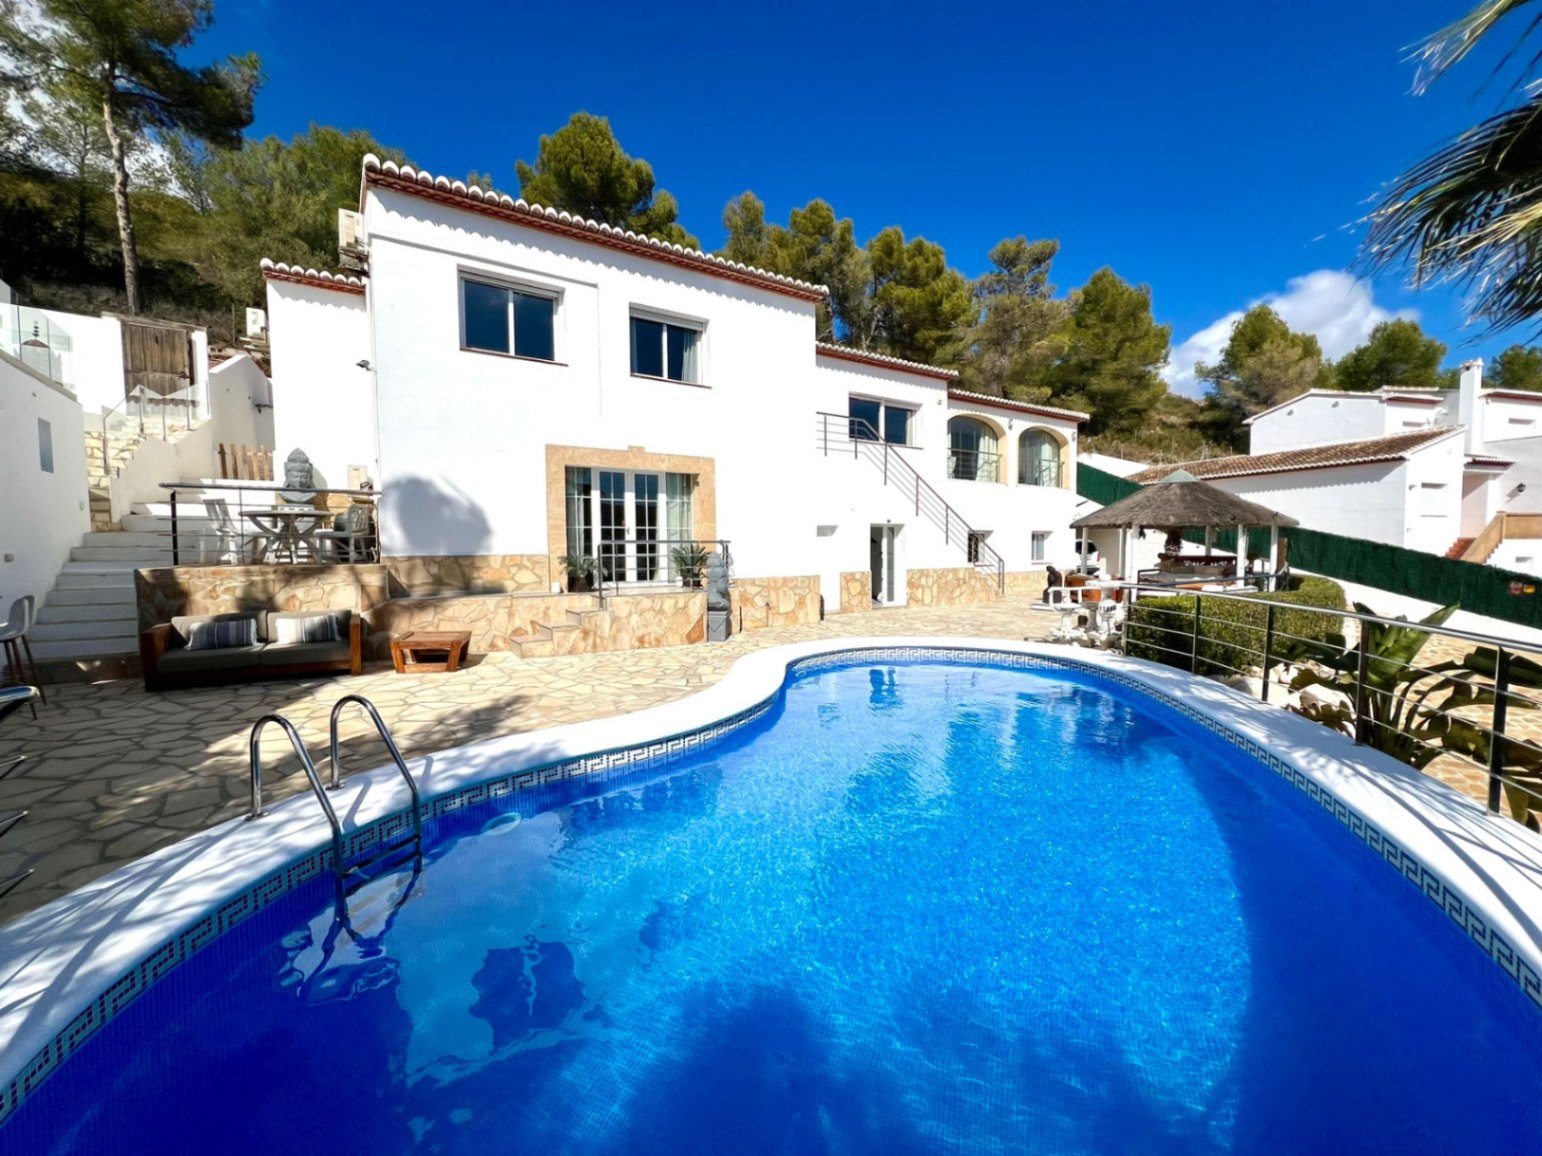 Exquisite 5-Bedroom Villa with Stunning Views for sale in Javea Close to the beach.